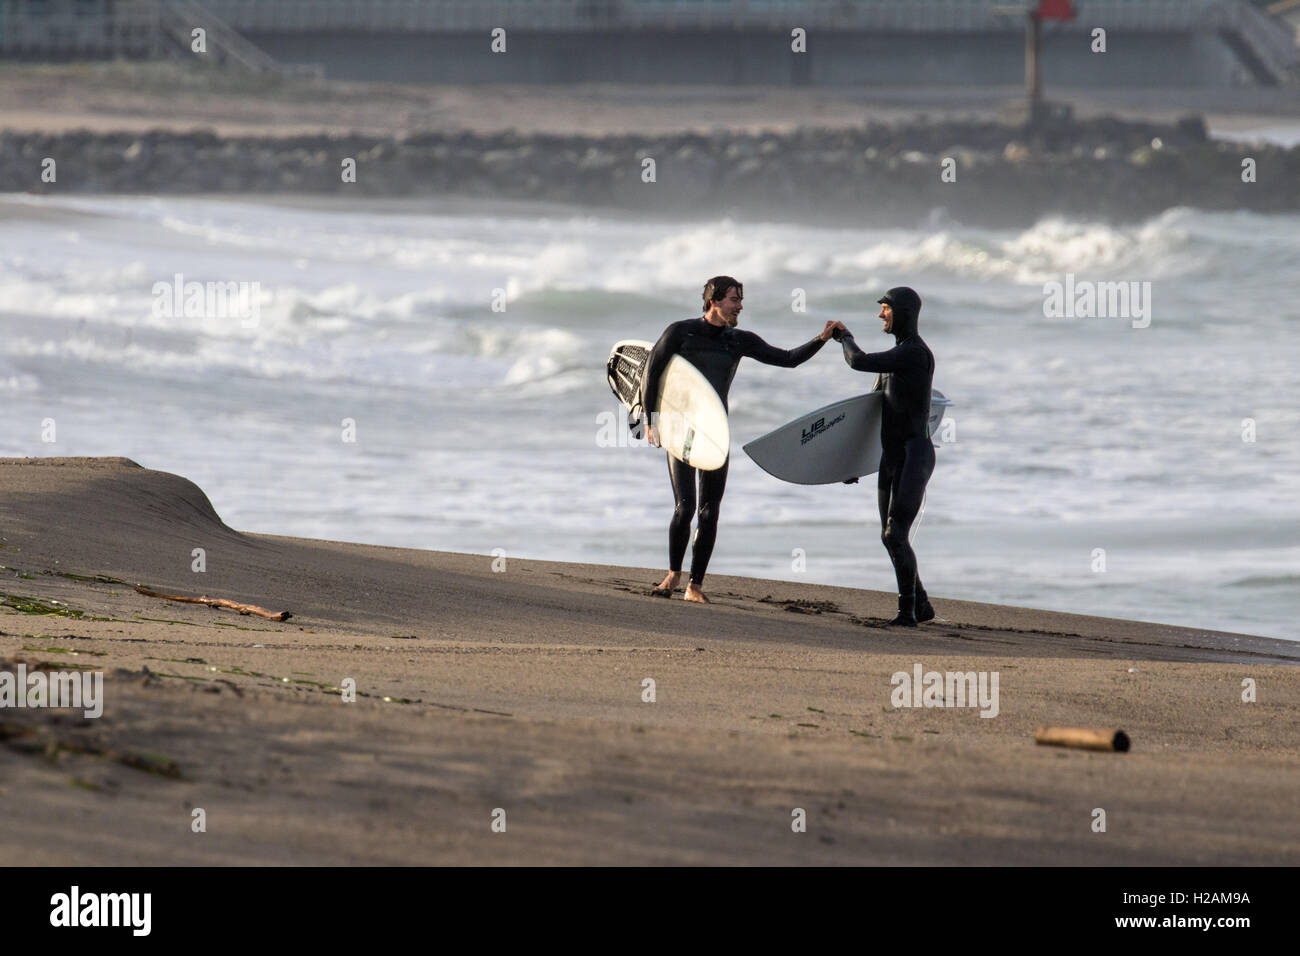 Two surfers congratulate each other after their successful rides in the Pacific Ocean of northern California near Moss Landing. Stock Photo